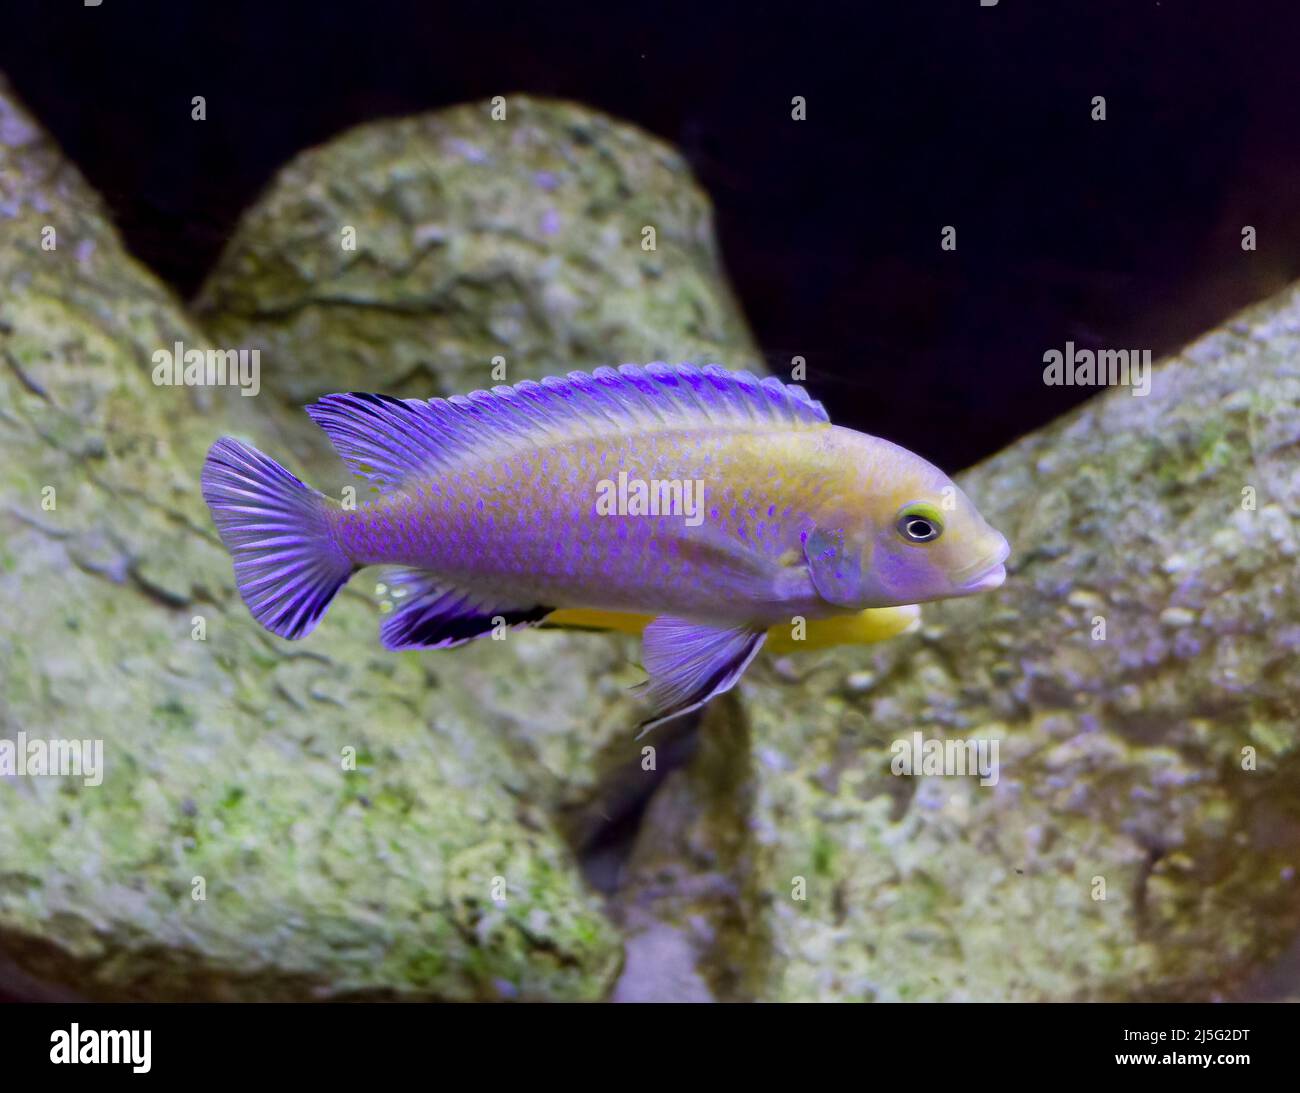 The pindani (Pseudotropheus socolofi) is a species of cichlid endemic to Lake Malawi preferring areas with sandy substrates and nearby rocks where the Stock Photo